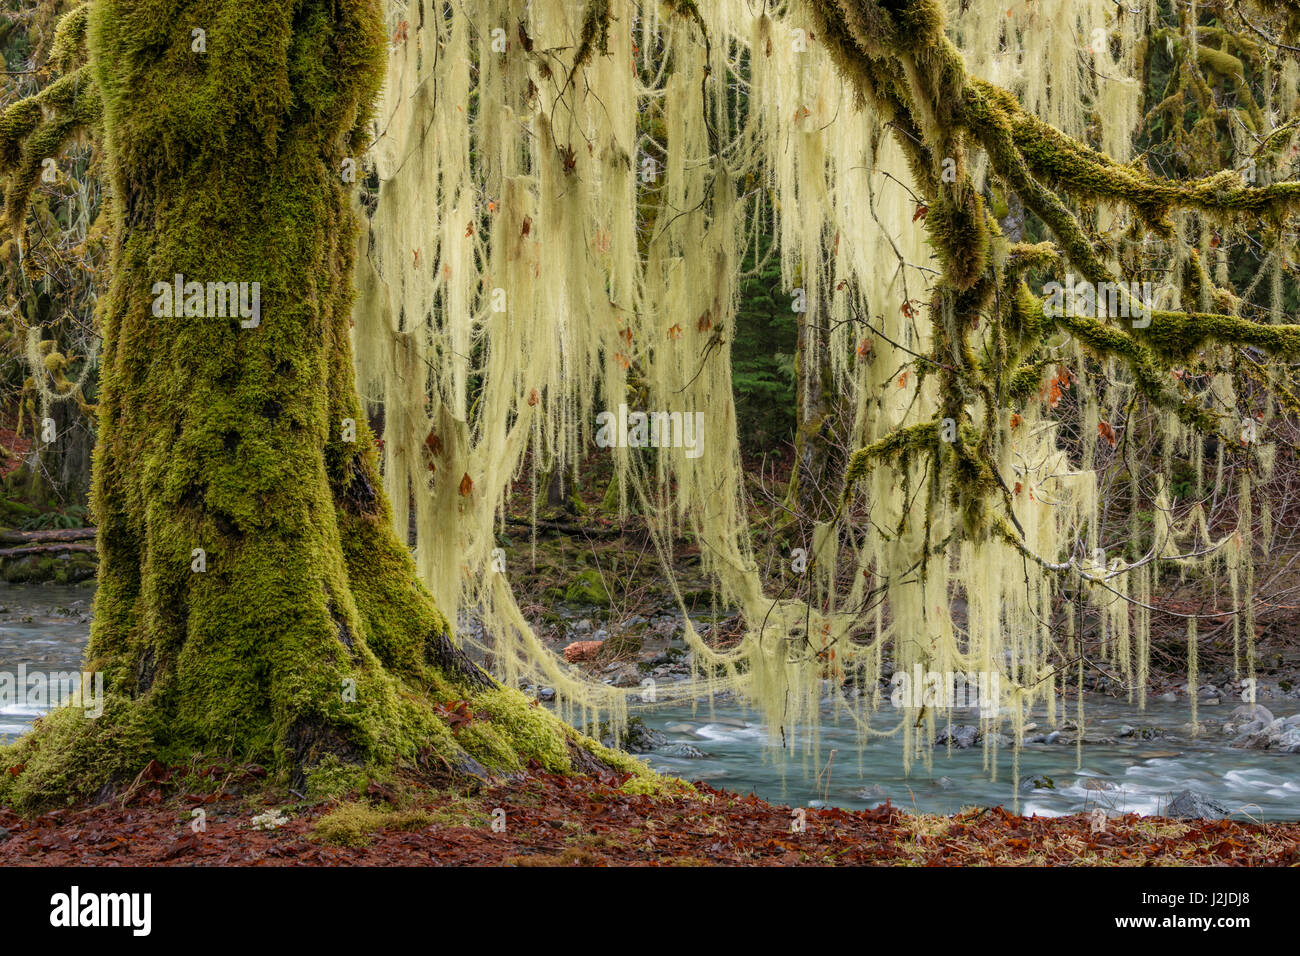 USA, Washington State, Olympic National Park. Bigleaf maple tree draped with lichen. Credit as: Don Paulson / Jaynes Gallery / DanitaDelimont.com (Large format sizes available) Stock Photo